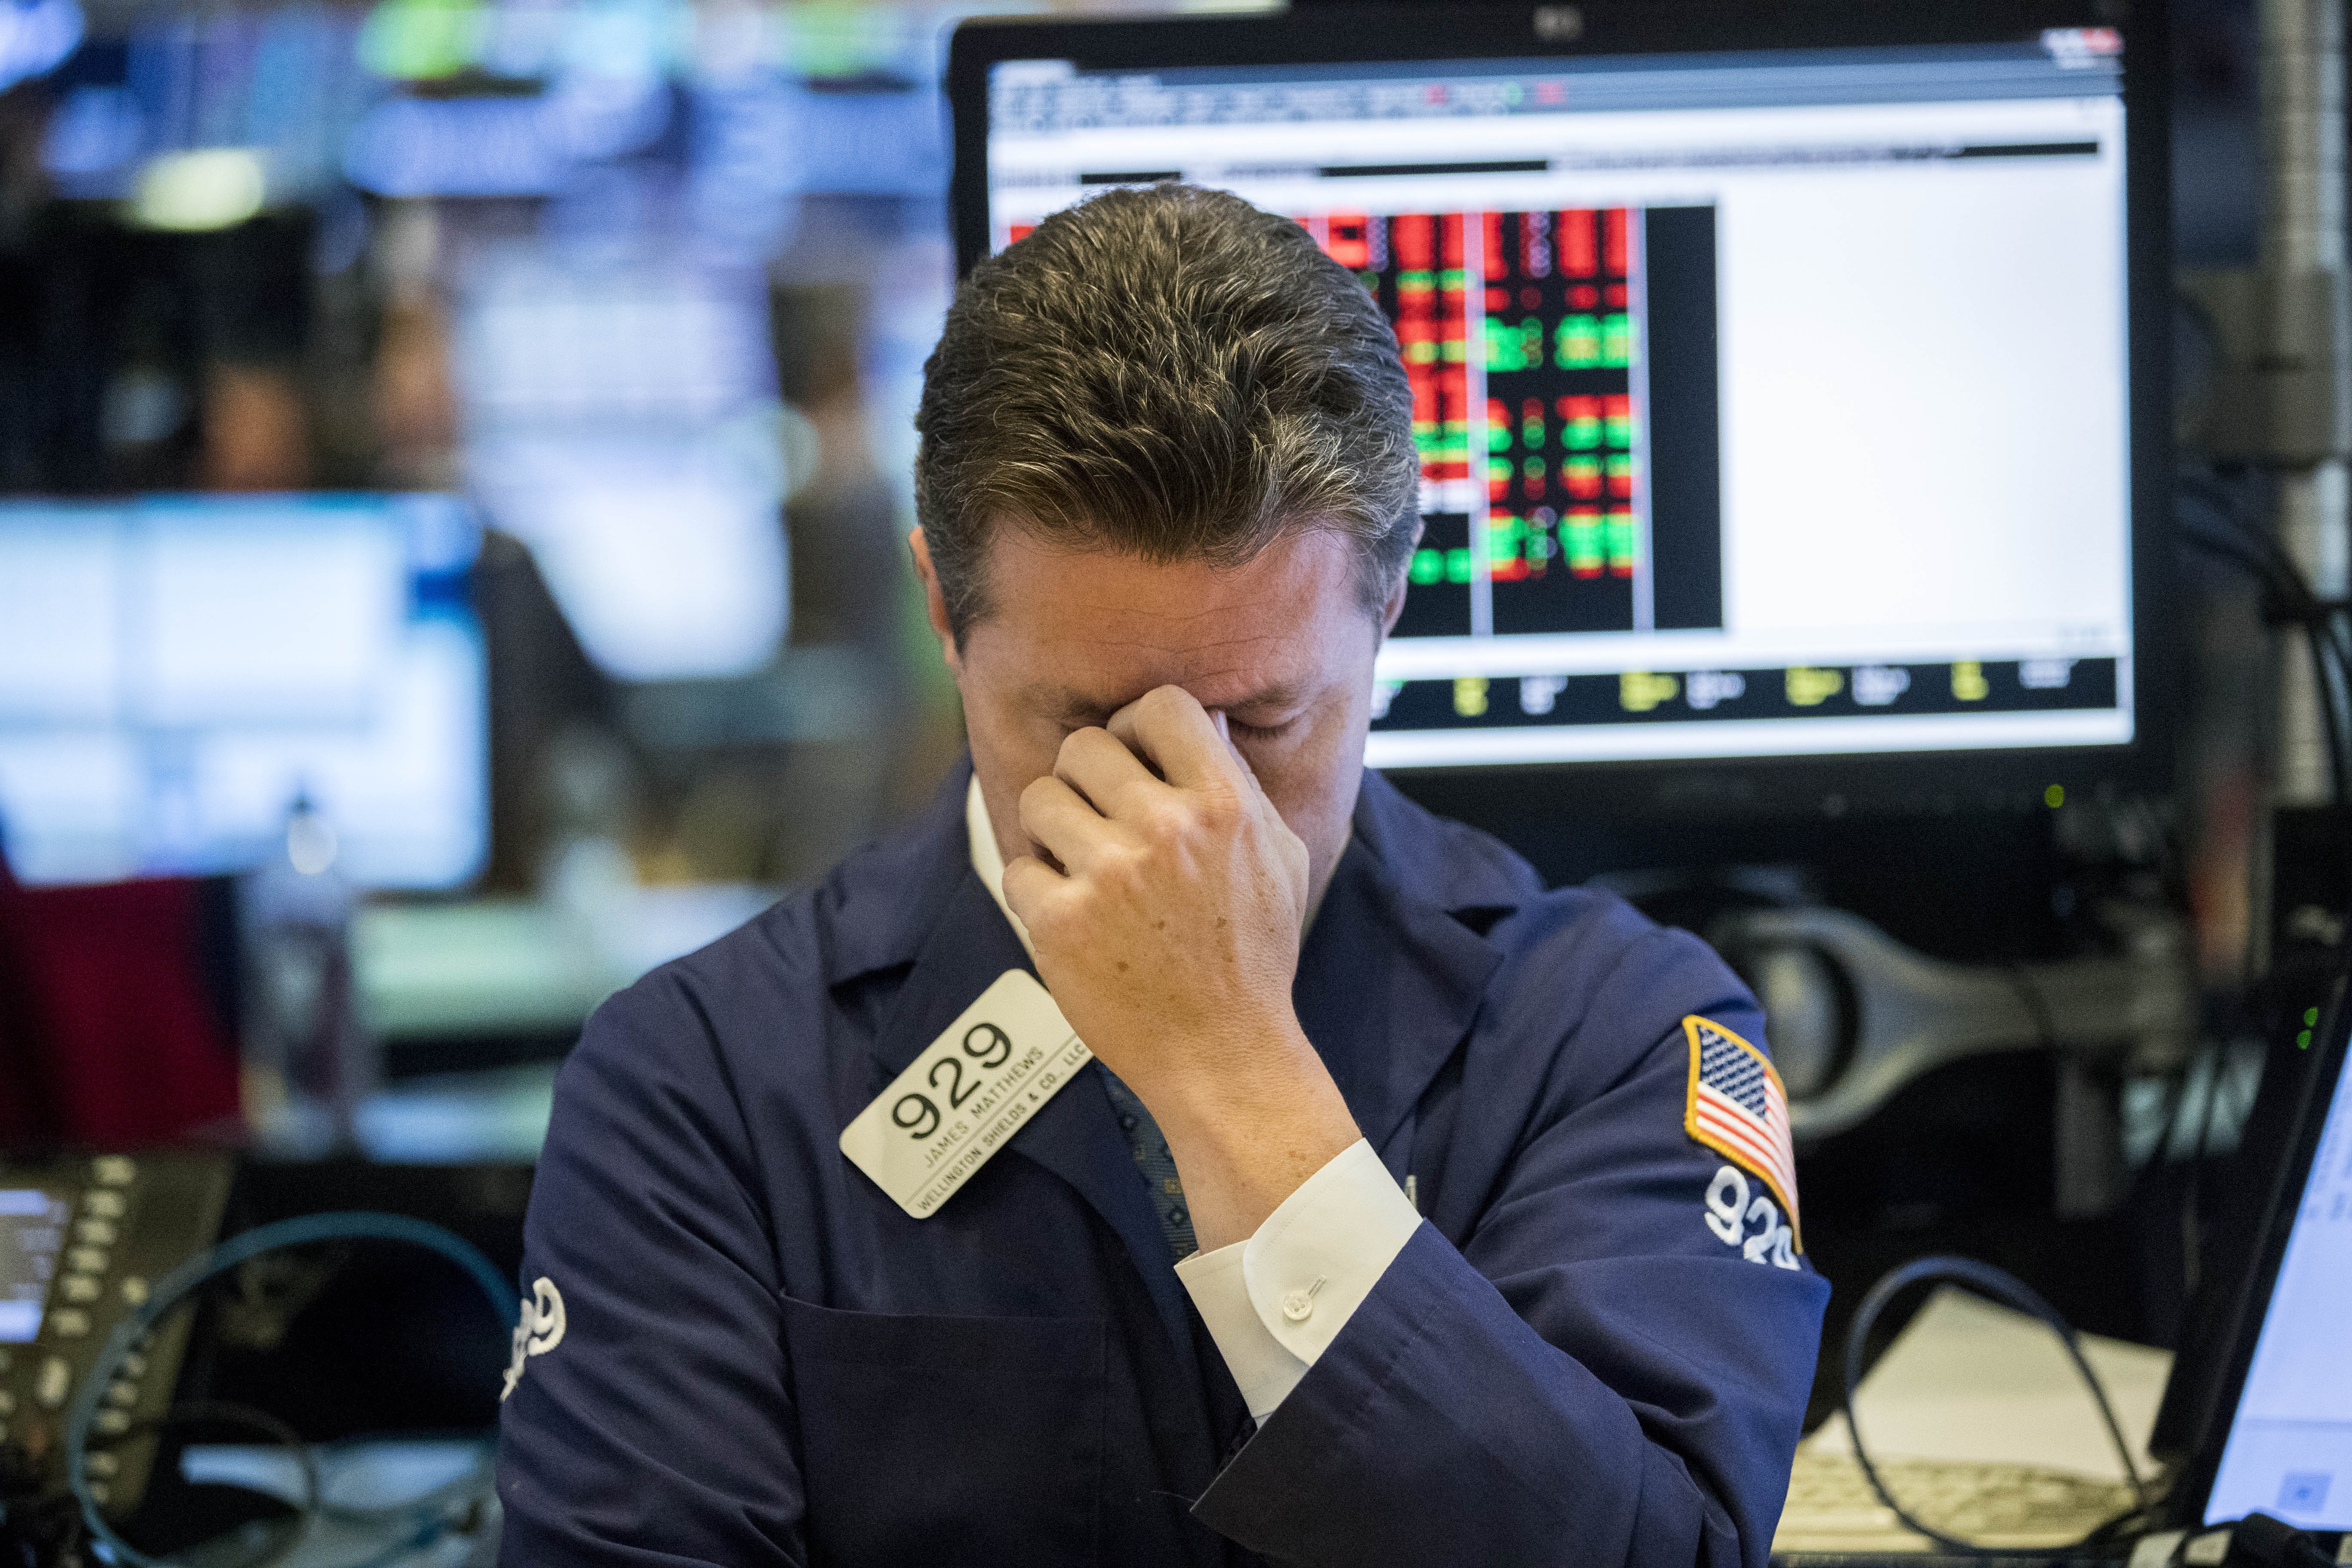 A trader at the New York Stock Exchange on October 11 – a day when US stocks suffered deep losses in volatile trading. Photo: Xinhua